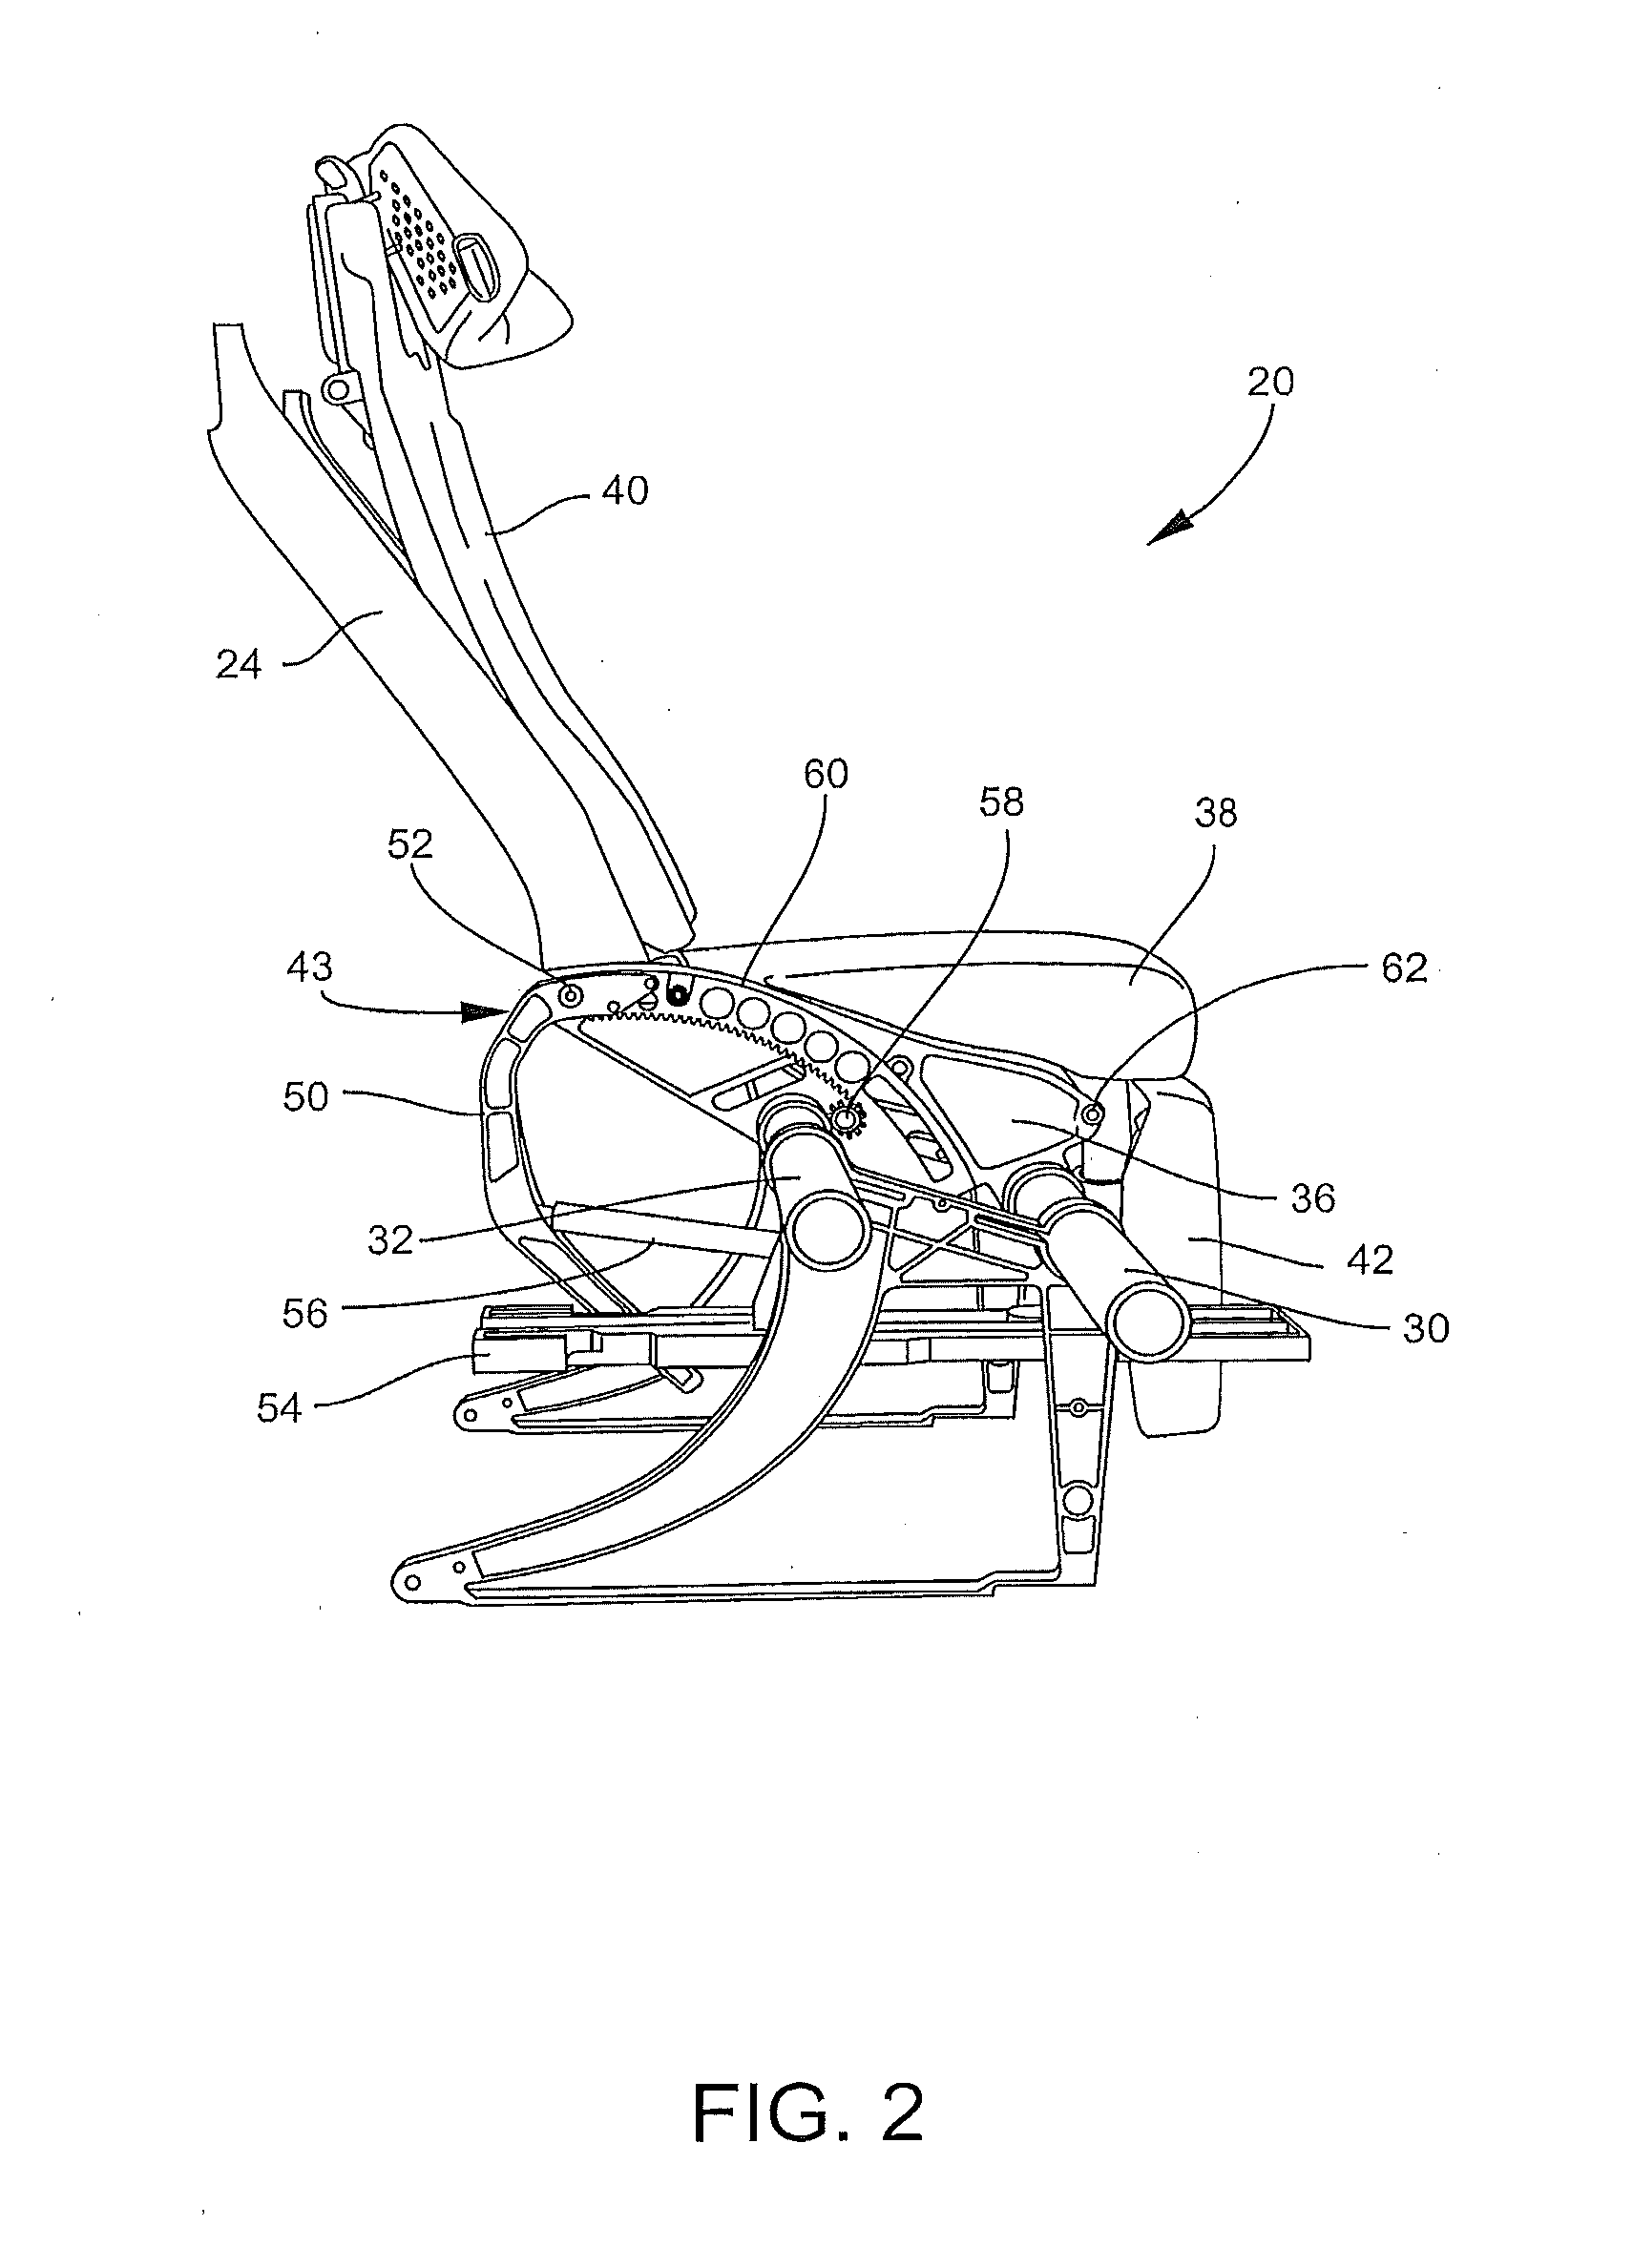 Cradle recline mechanism for fixed-shell aircraft seat